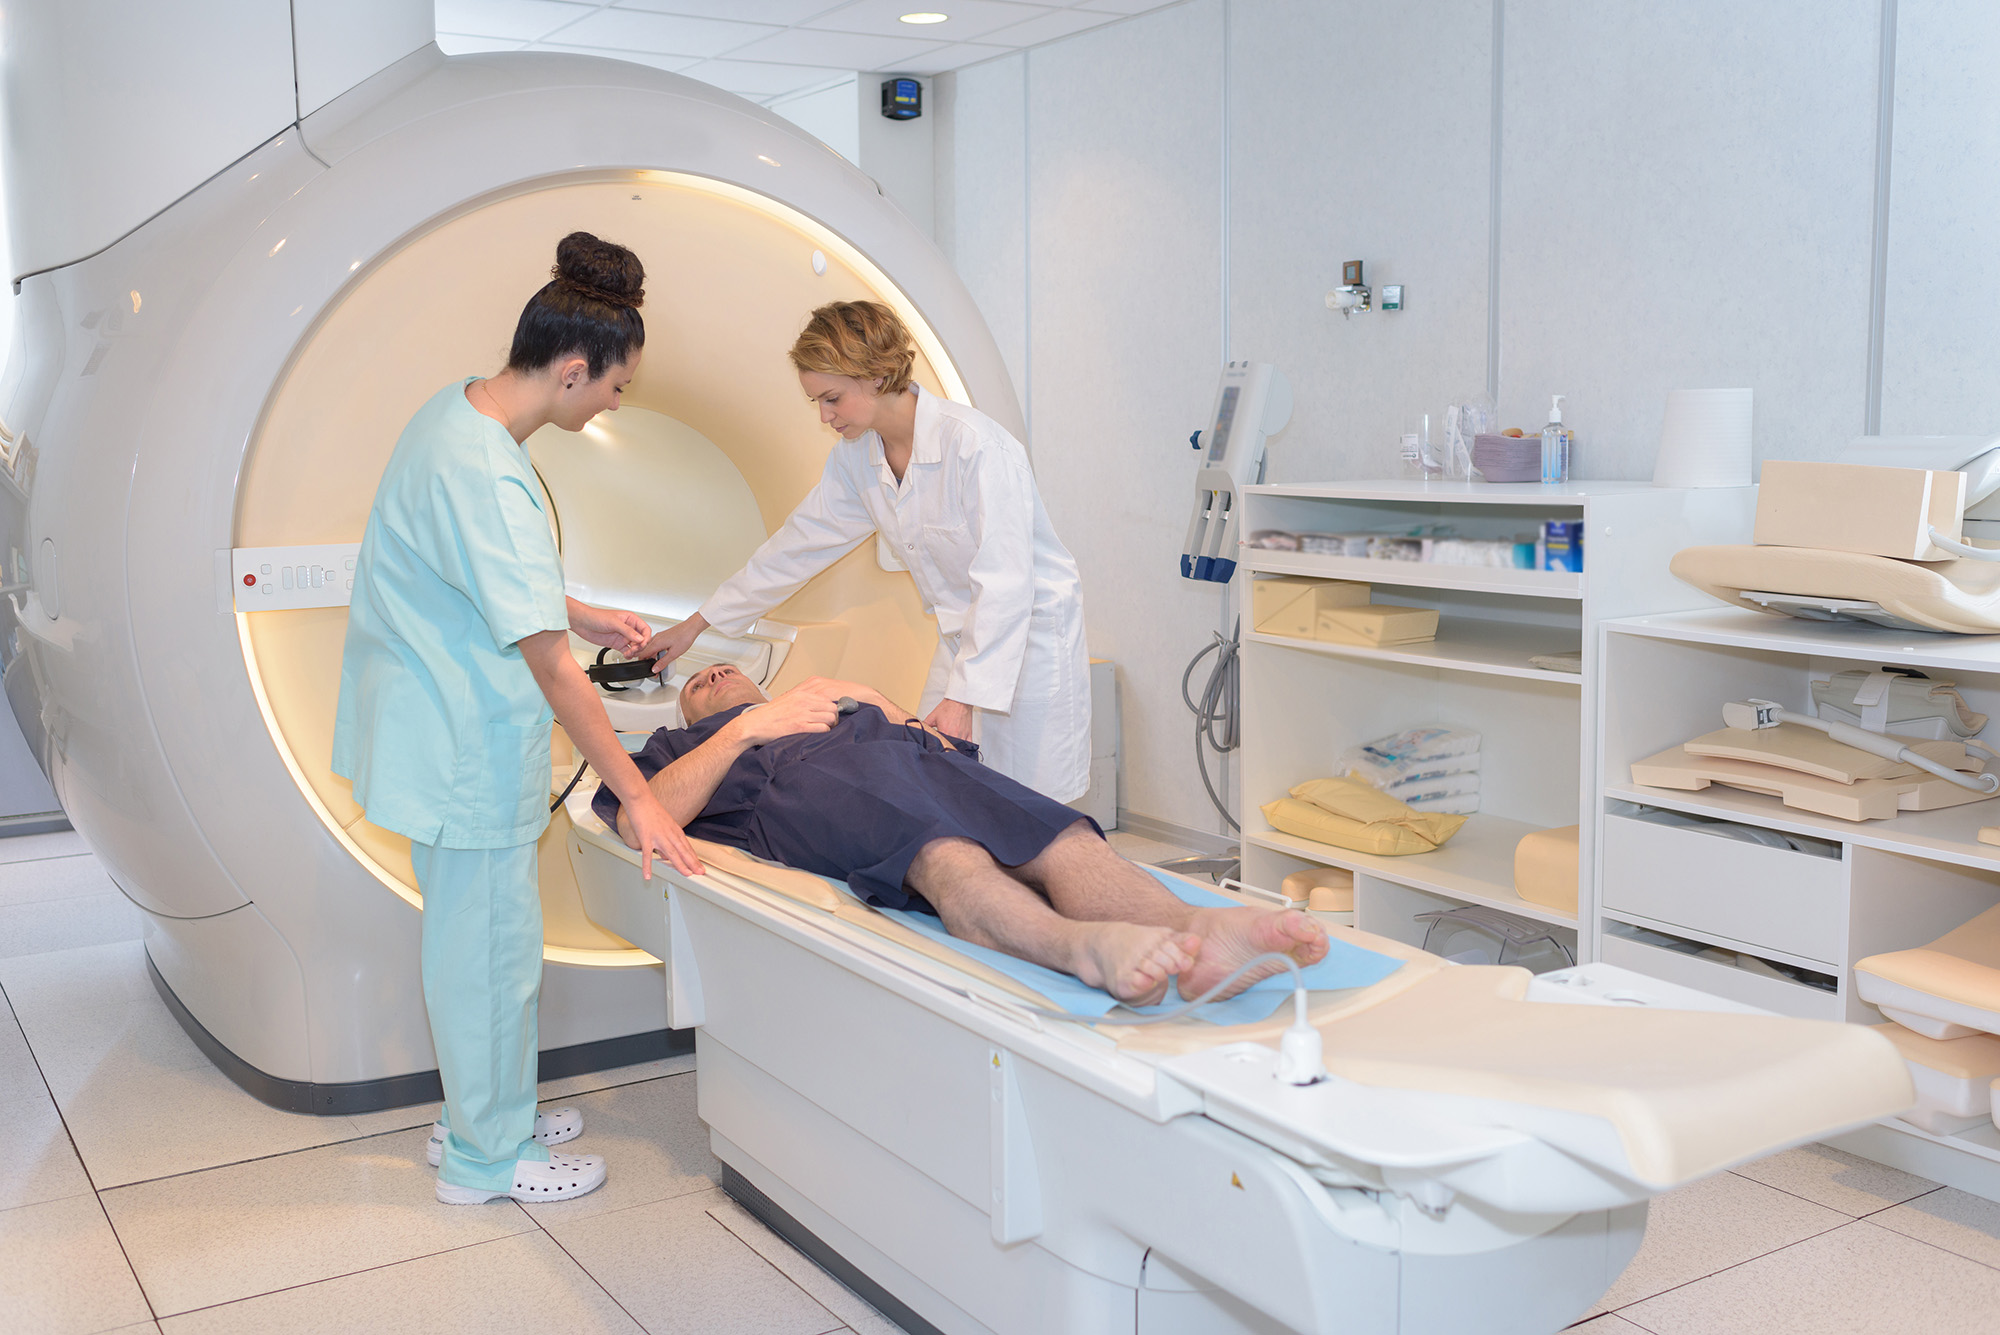 Two healthcare workers assisting a patient lying down in an MRI machine